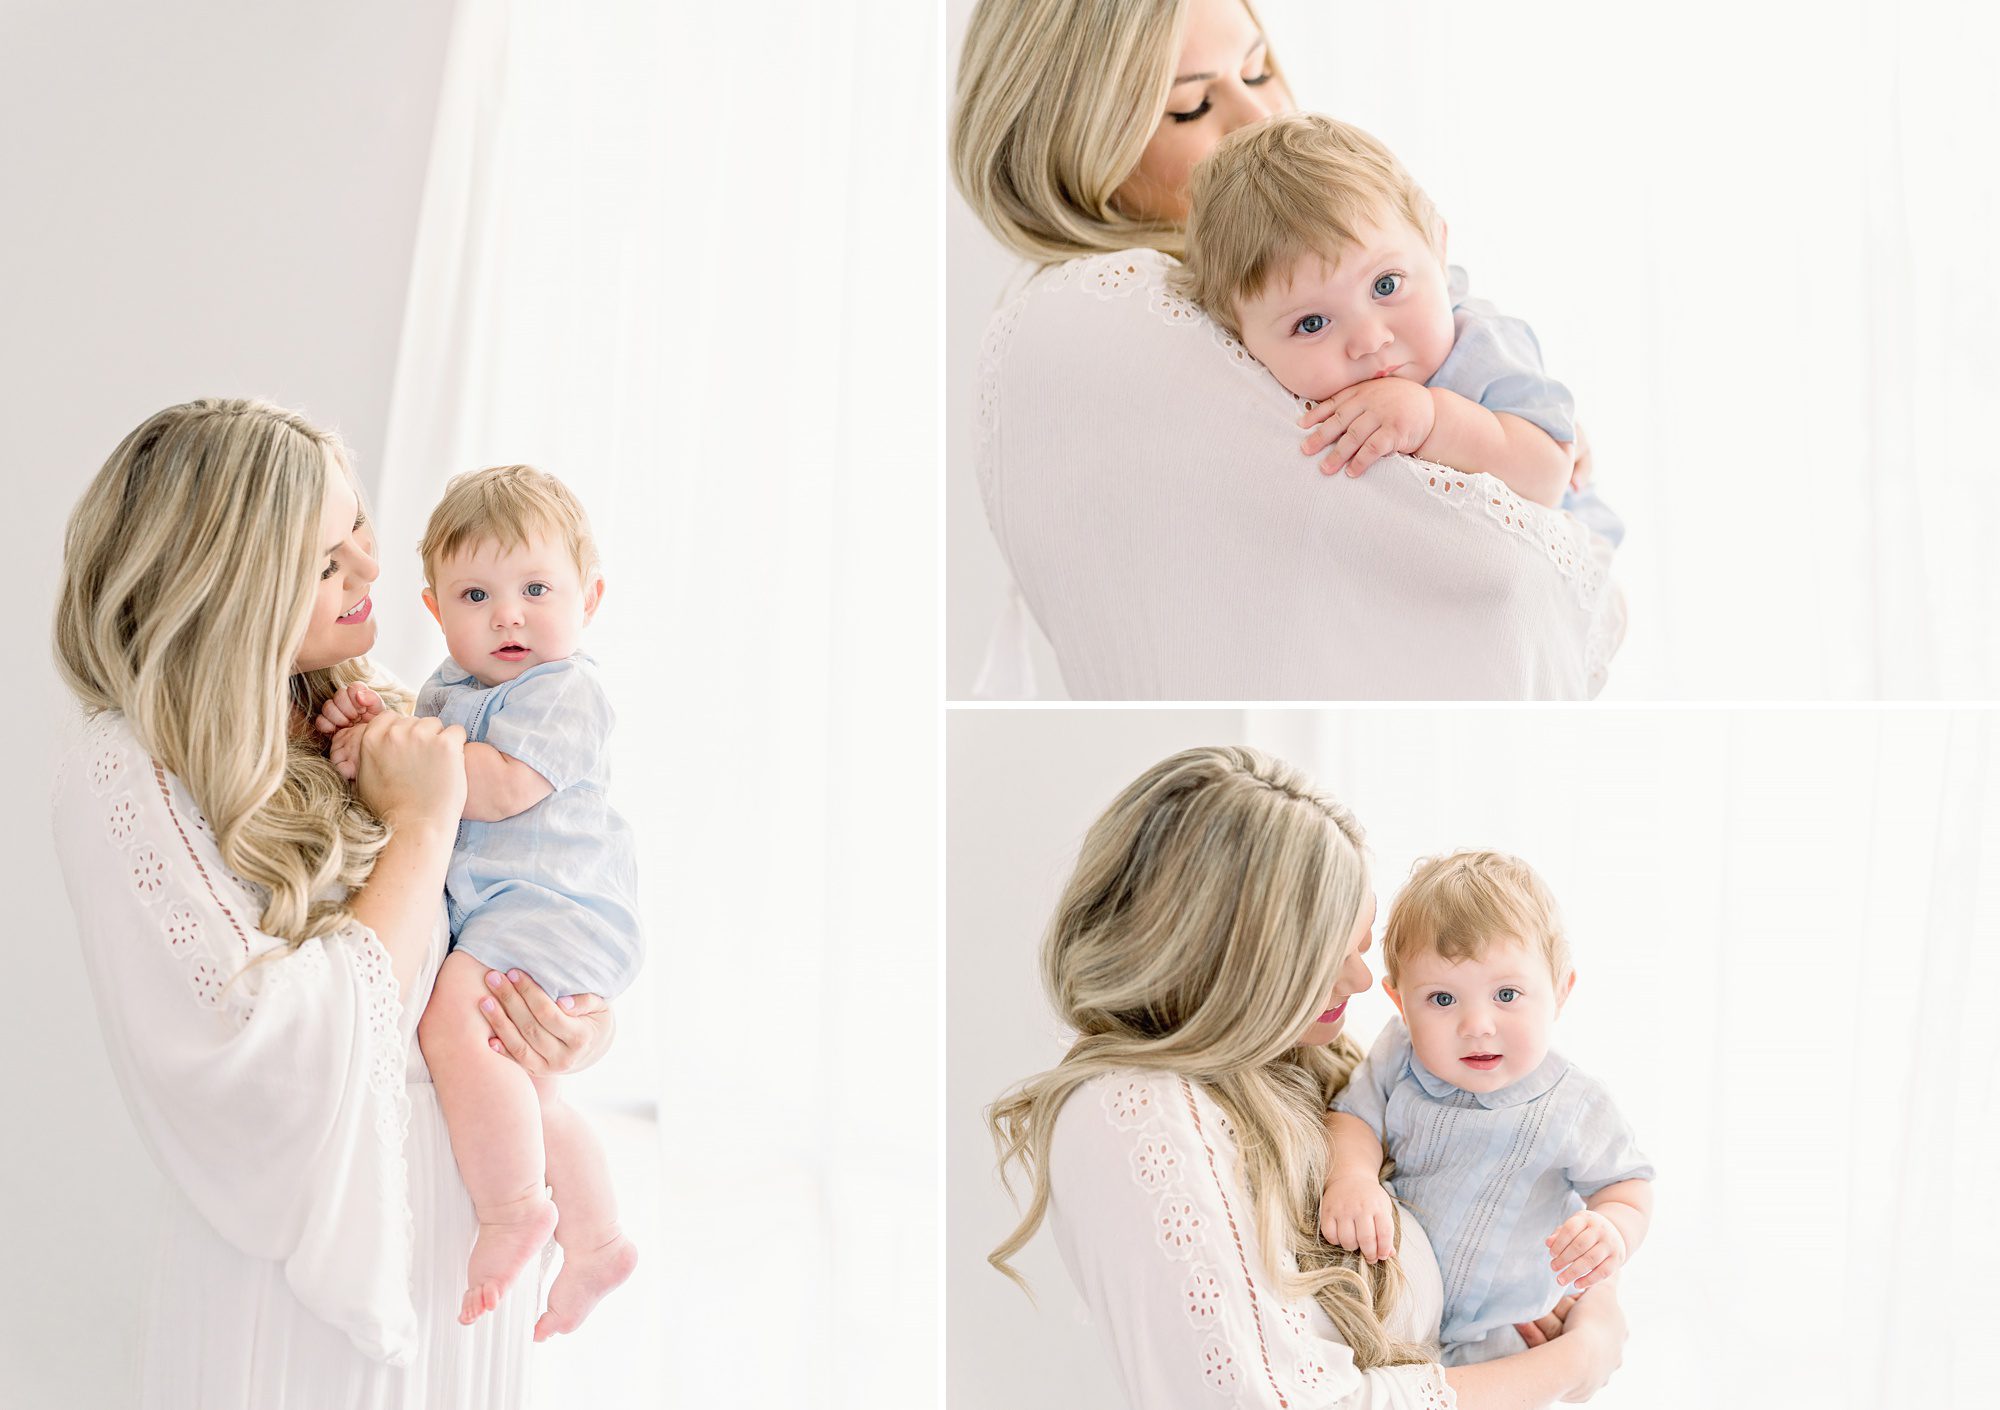 A beautiful mother and baby boy take 6 month portraits together in a bright white studio.